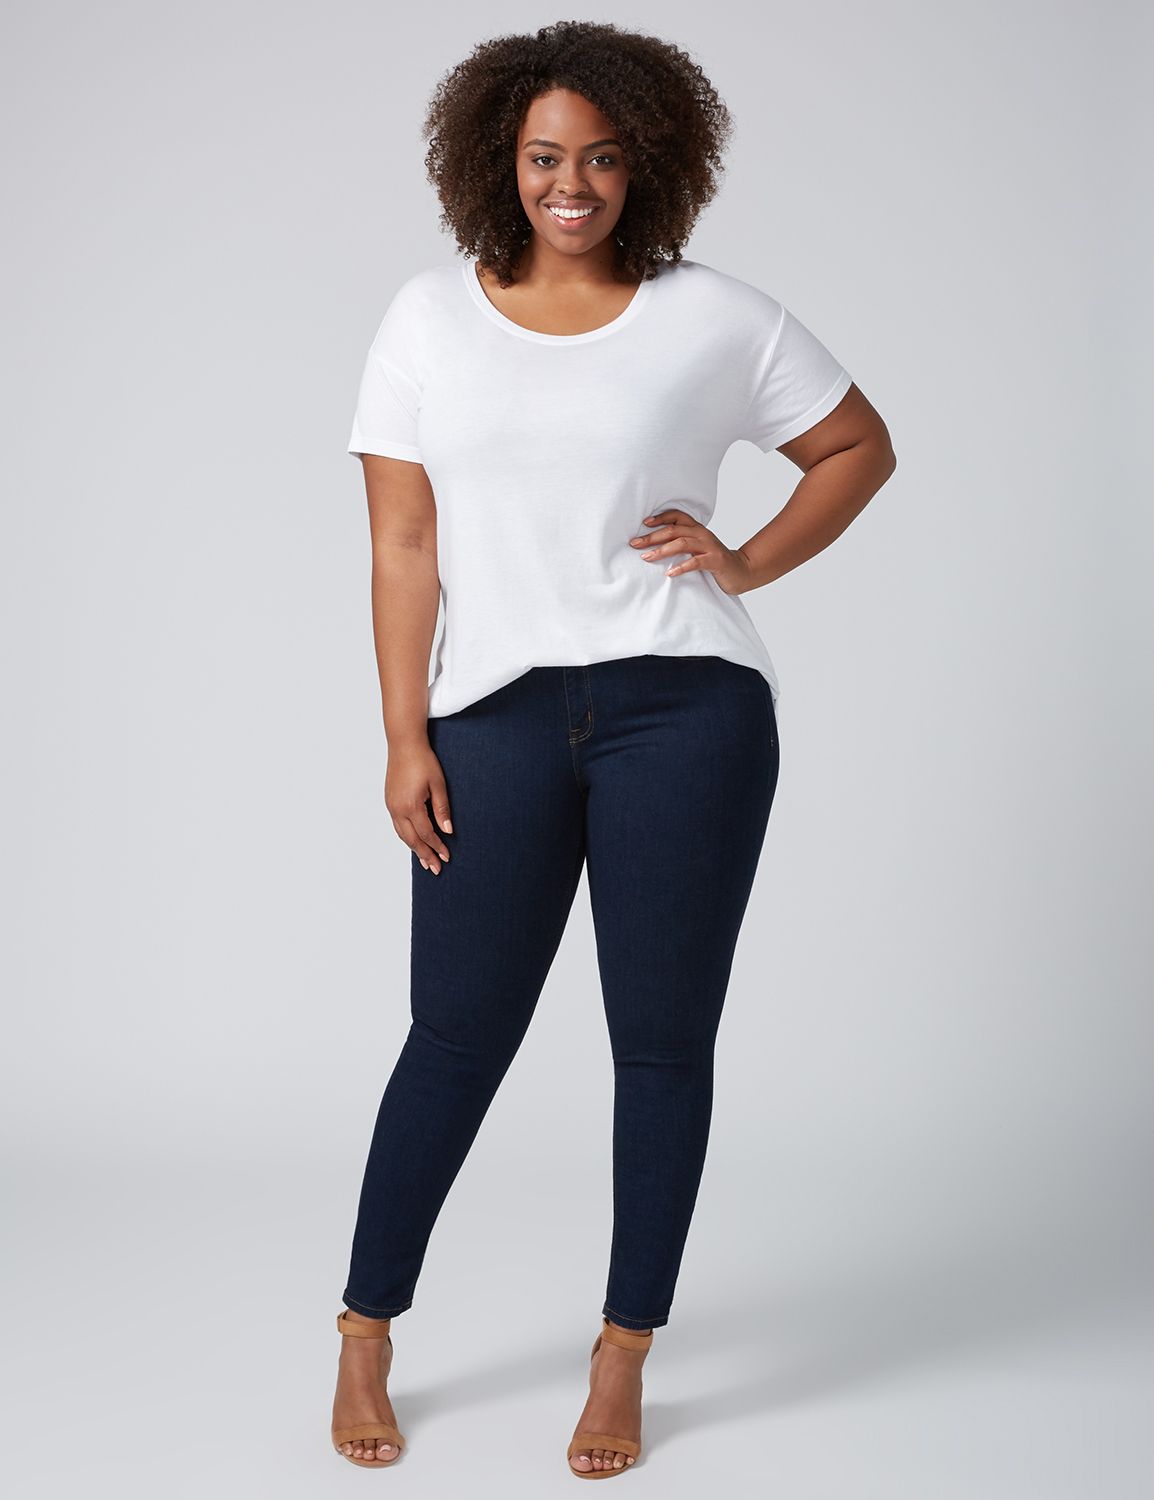 Plus Size Jeans | Styles Including Skinny, Bootcut And Boyfriend Jeans ...